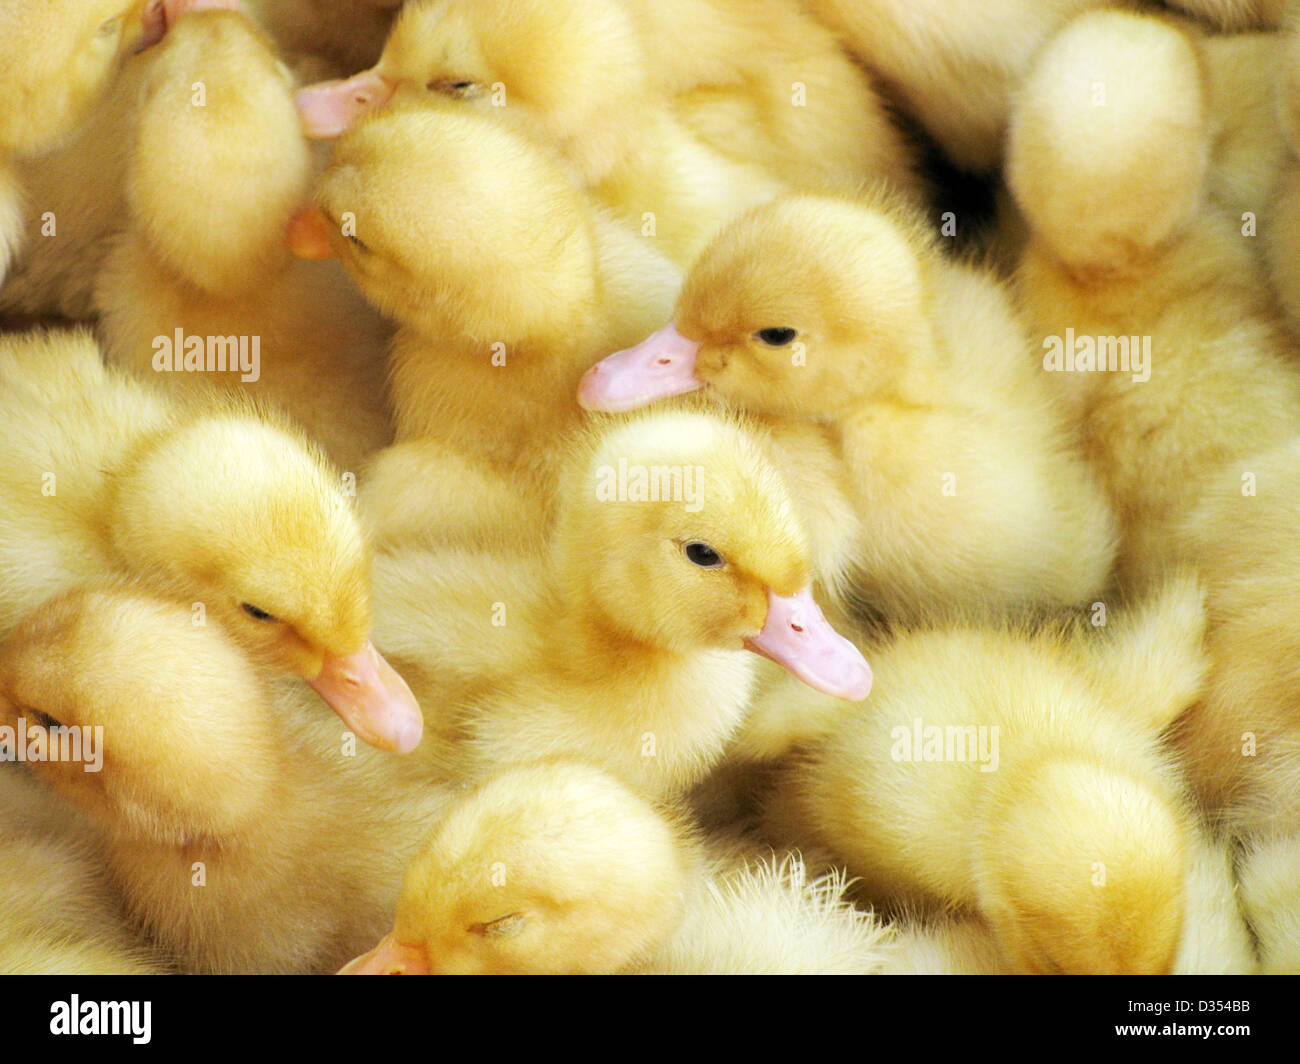 close up of several ducklings Stock Photo